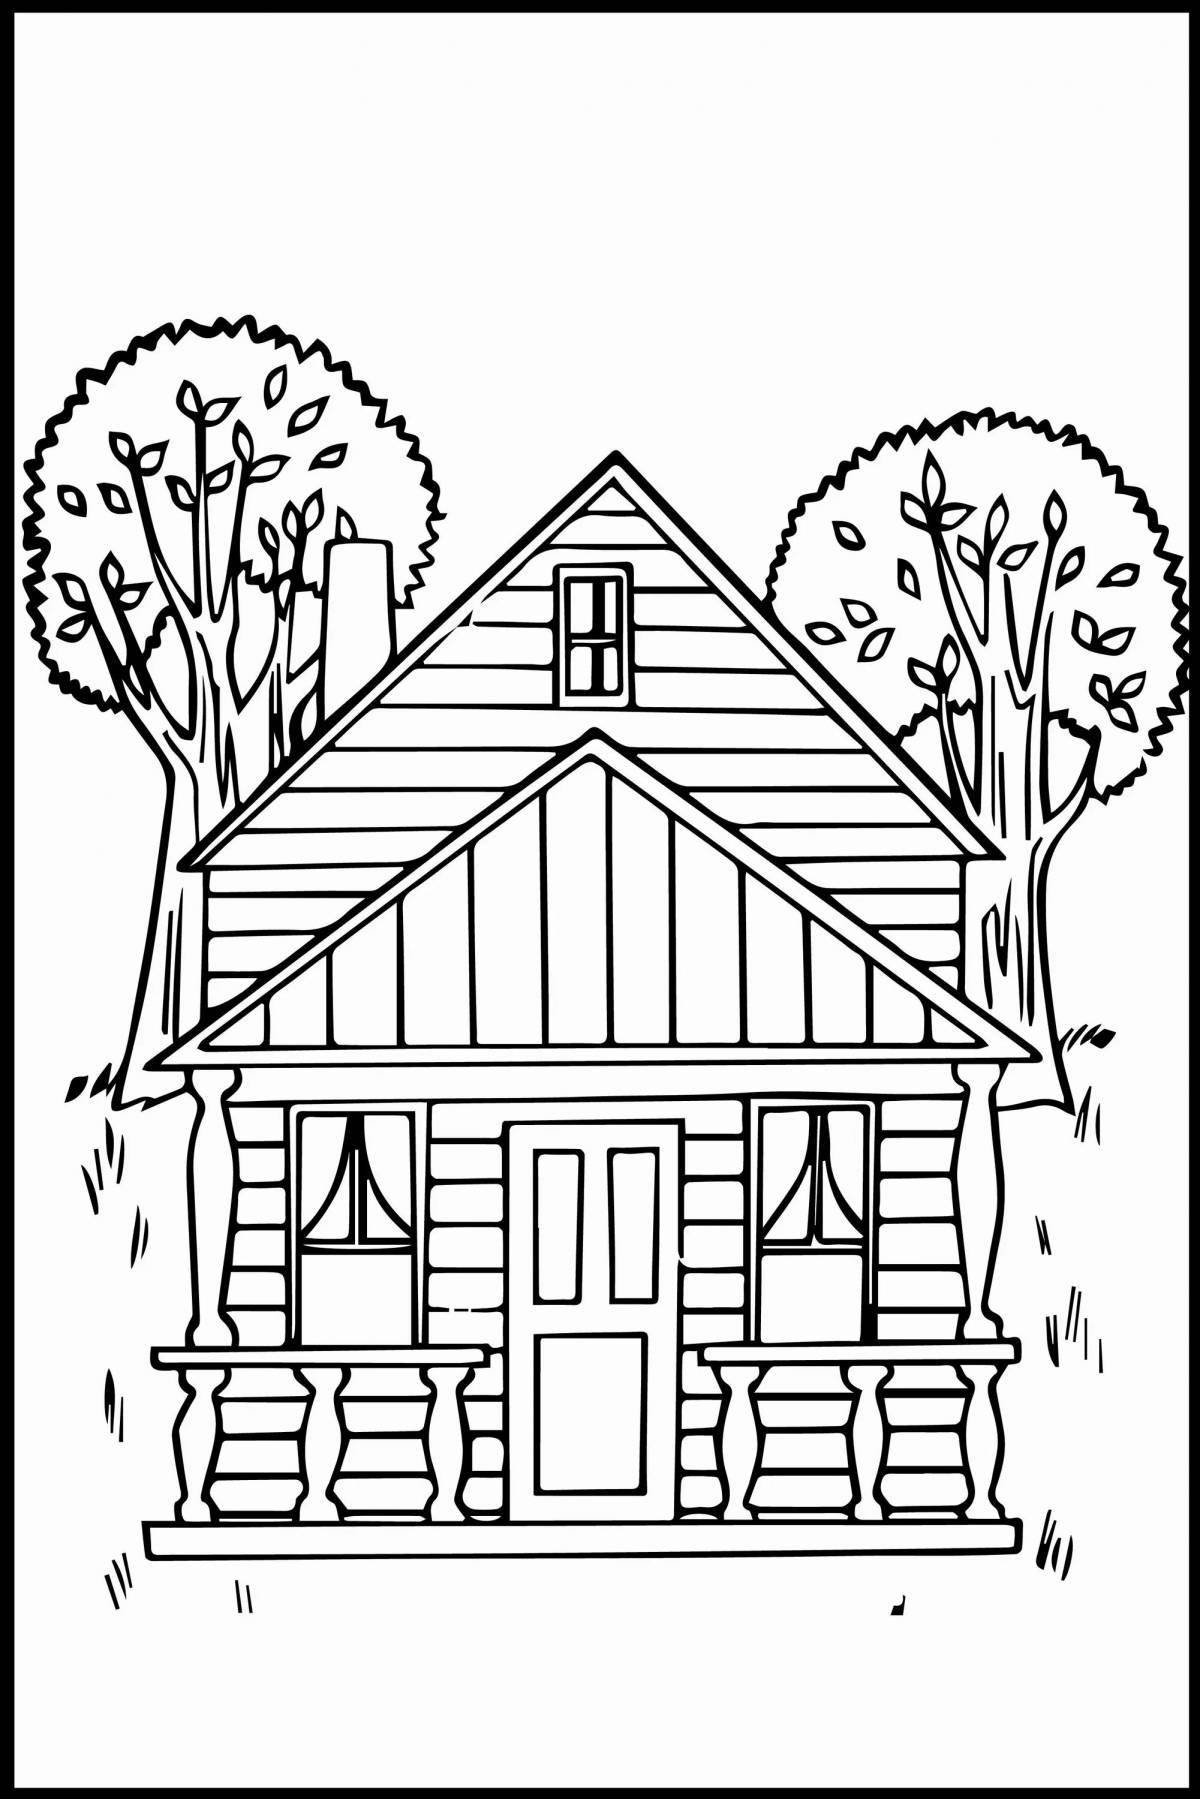 Adorable country house coloring book for kids